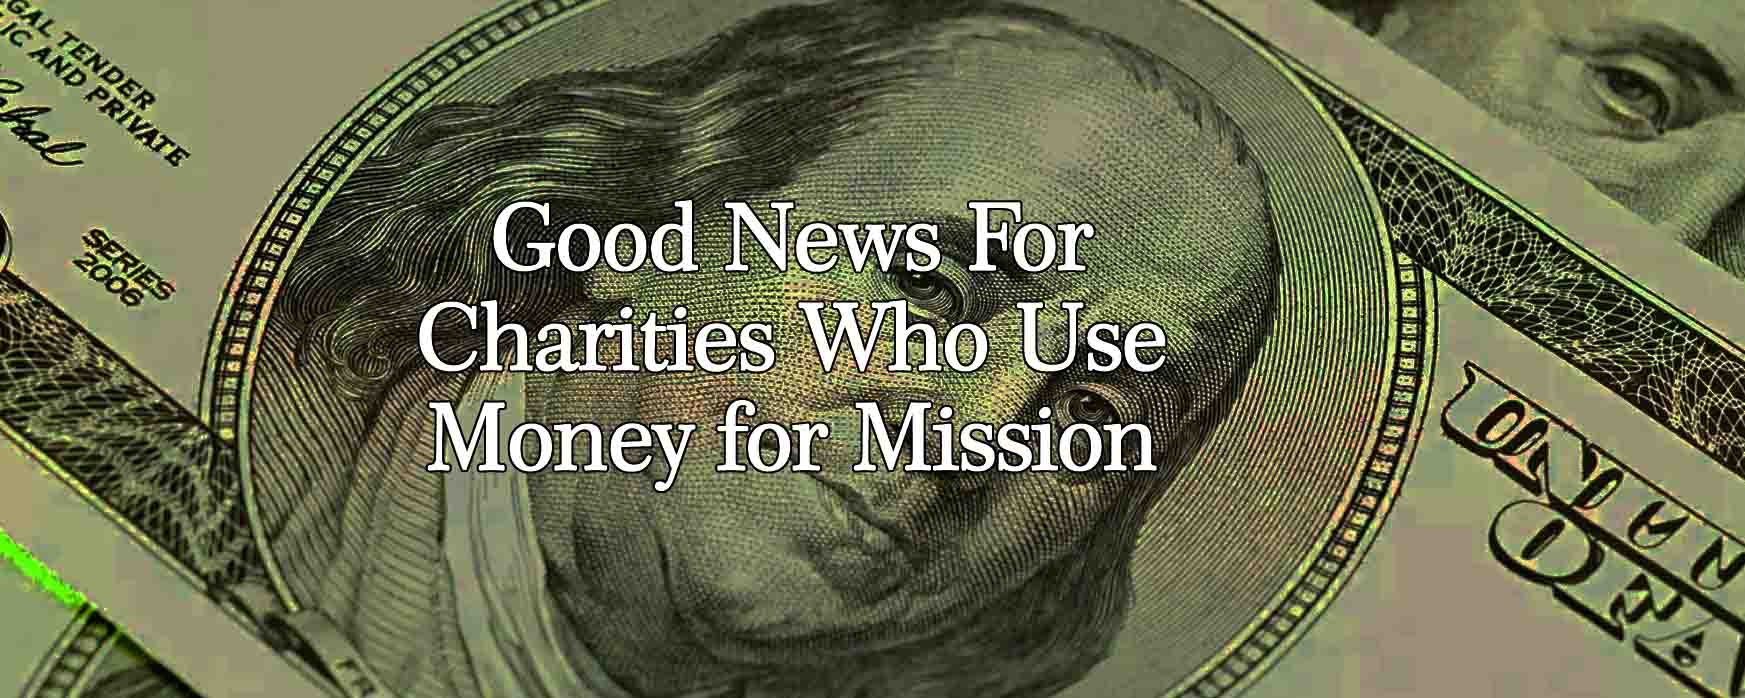 Jimmy LaRose Reports Good News For Charities Who Rely On Money For Mission